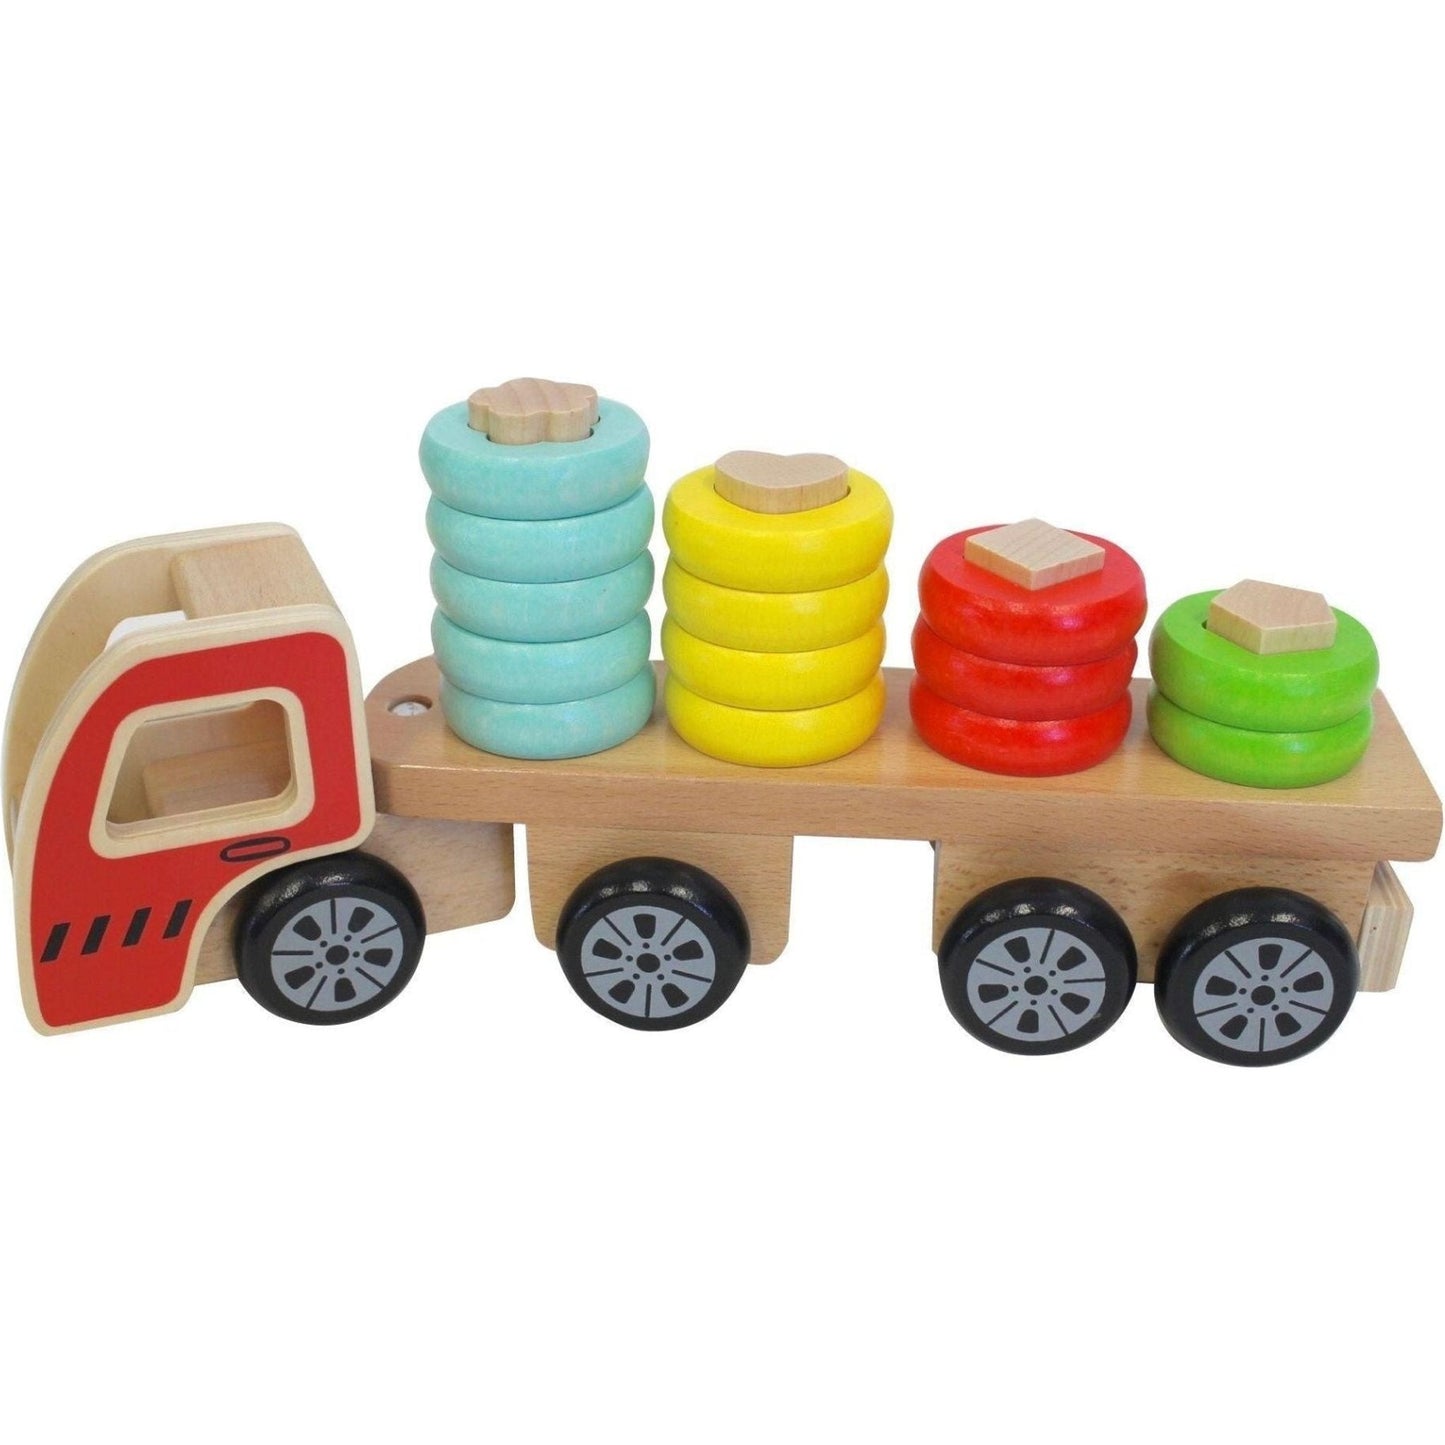 Sort N' Stack Truck - Toybox Tales